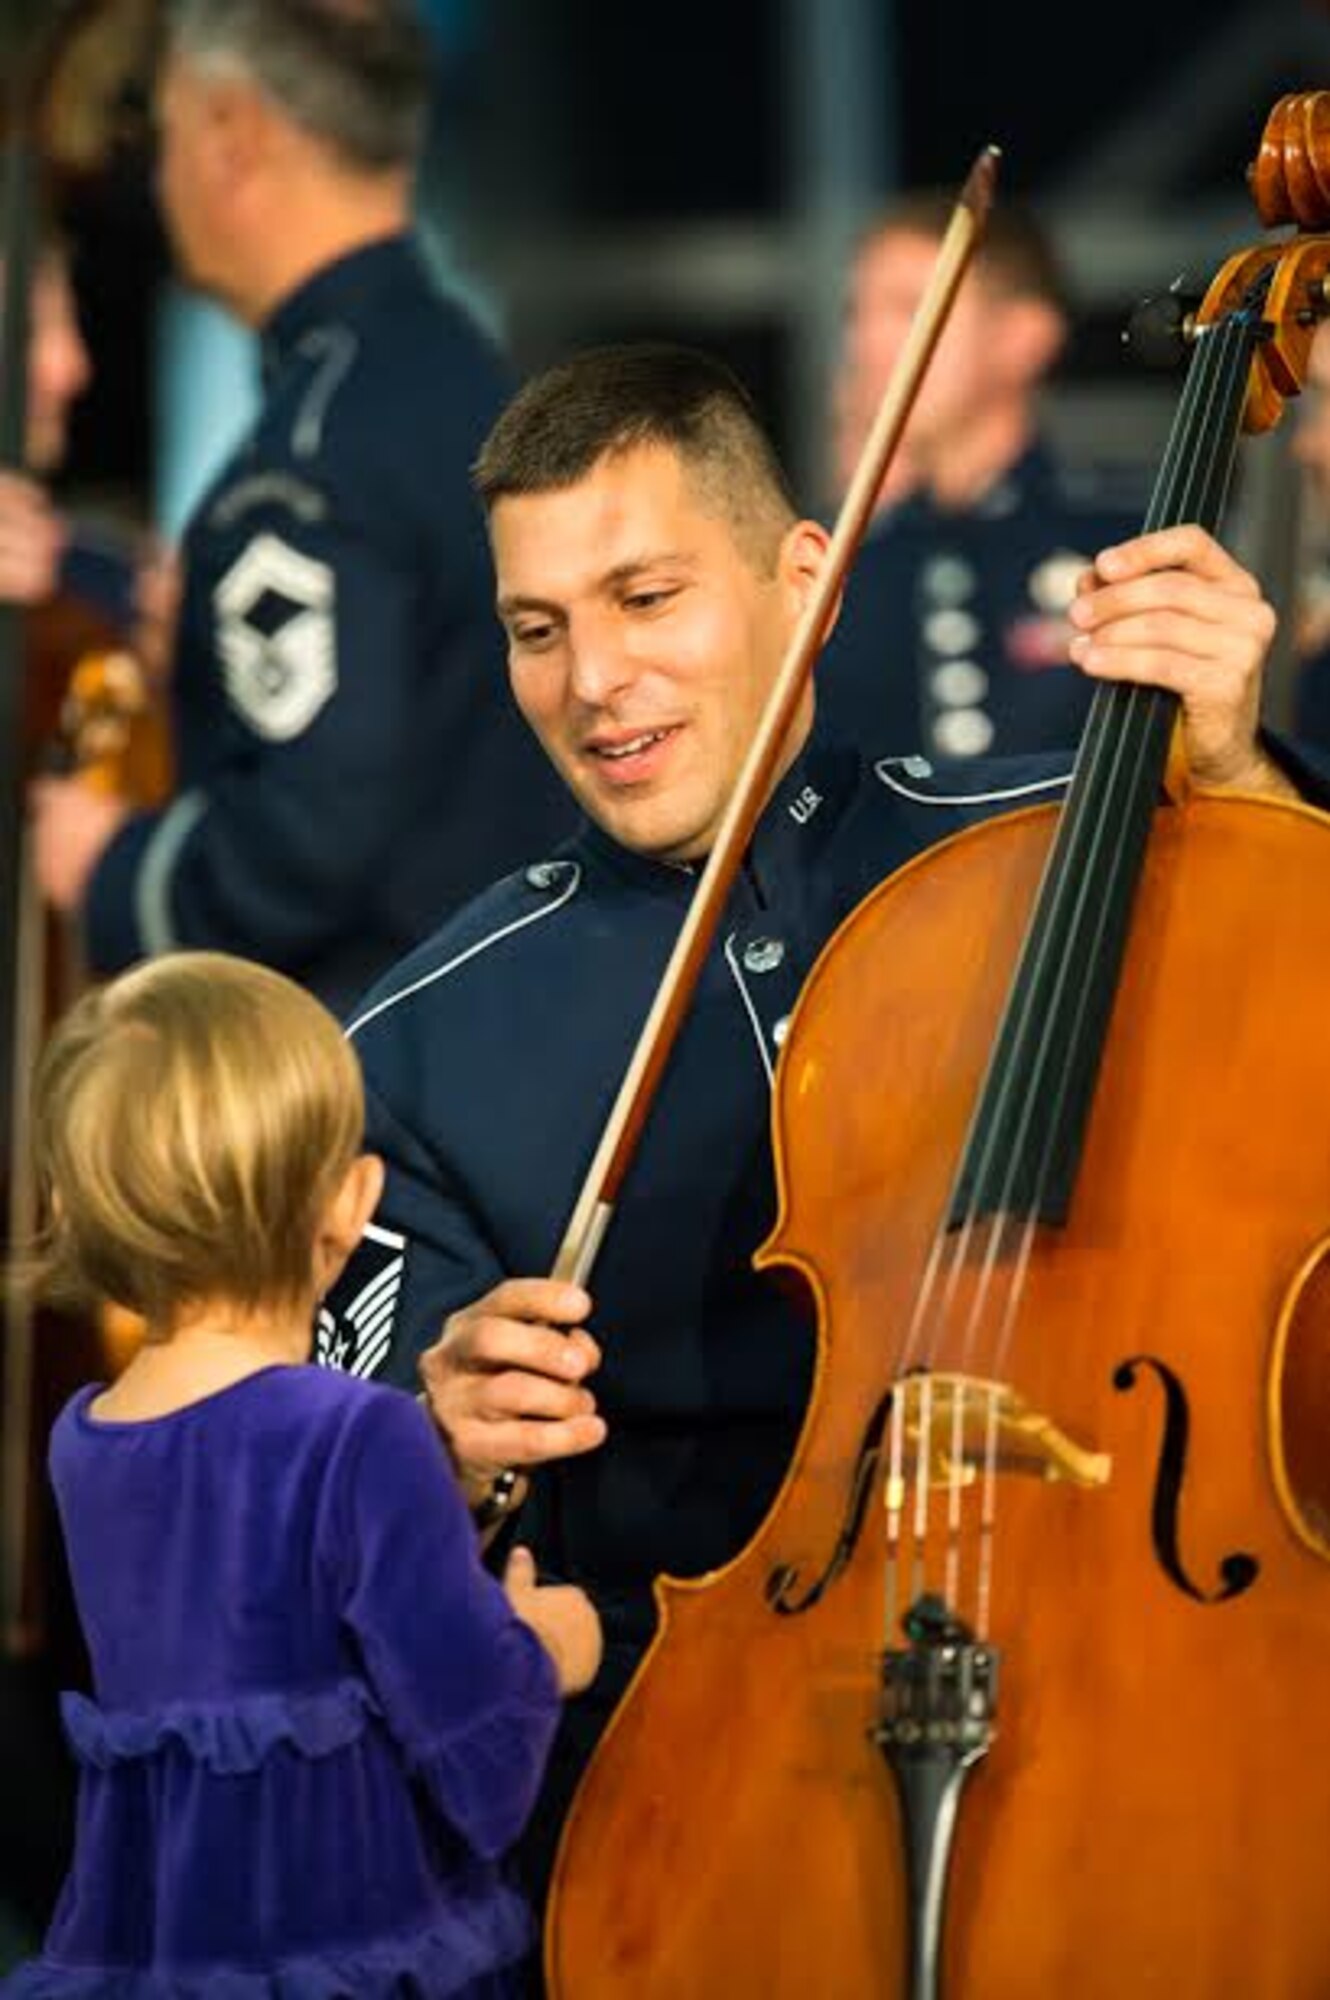 Master Sgt. Joshua Kowalsky, United States Air Force Concert Band cellist, talks with his daughter after their flash mob Dec. 2, 2014, at the Smithsonian National Air and Space Museum Udvar-Hazy Center in Chantilly, Va. The band’s mission is to honor those who have served, inspire American citizens to heightened patriotism and service, and positively impact the global community on behalf of the U.S. Air Force and America. (U.S. Air Force photo/ Staff Sgt. Devon Suits)